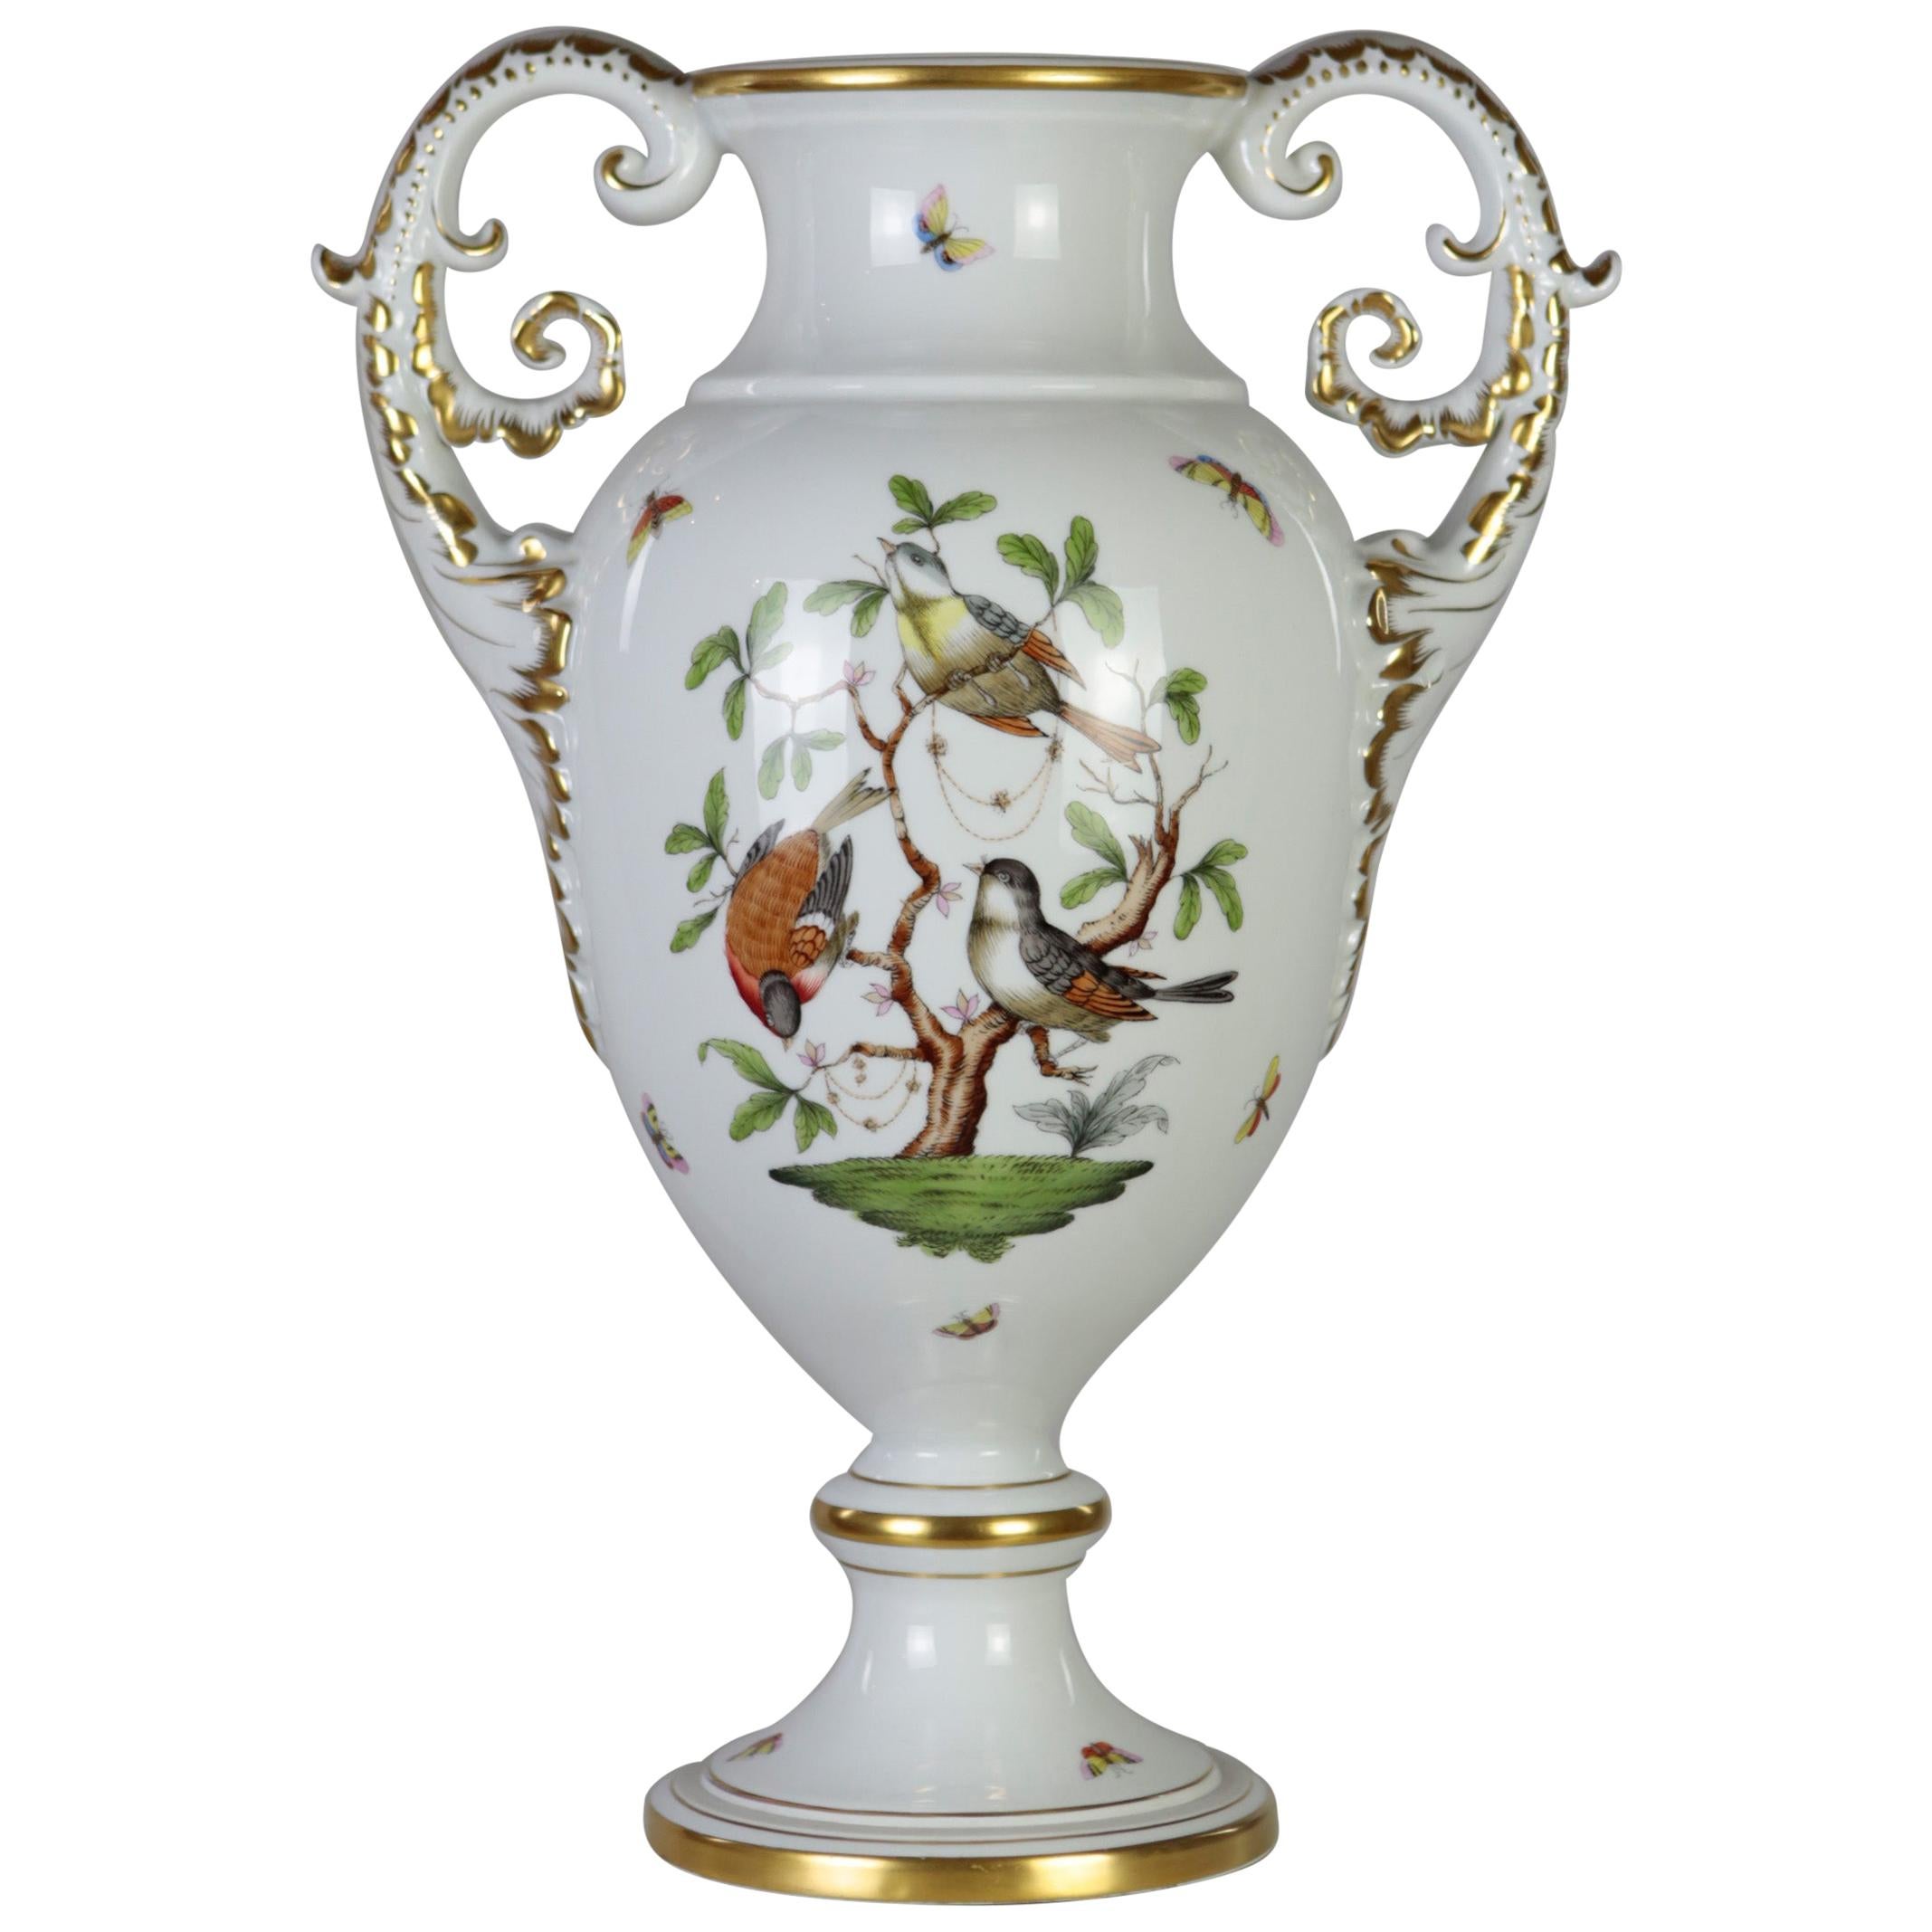 Herend Porcelain Amphora Vase, Rothschild Decor, Hand Painted, Gilded, Hungary For Sale